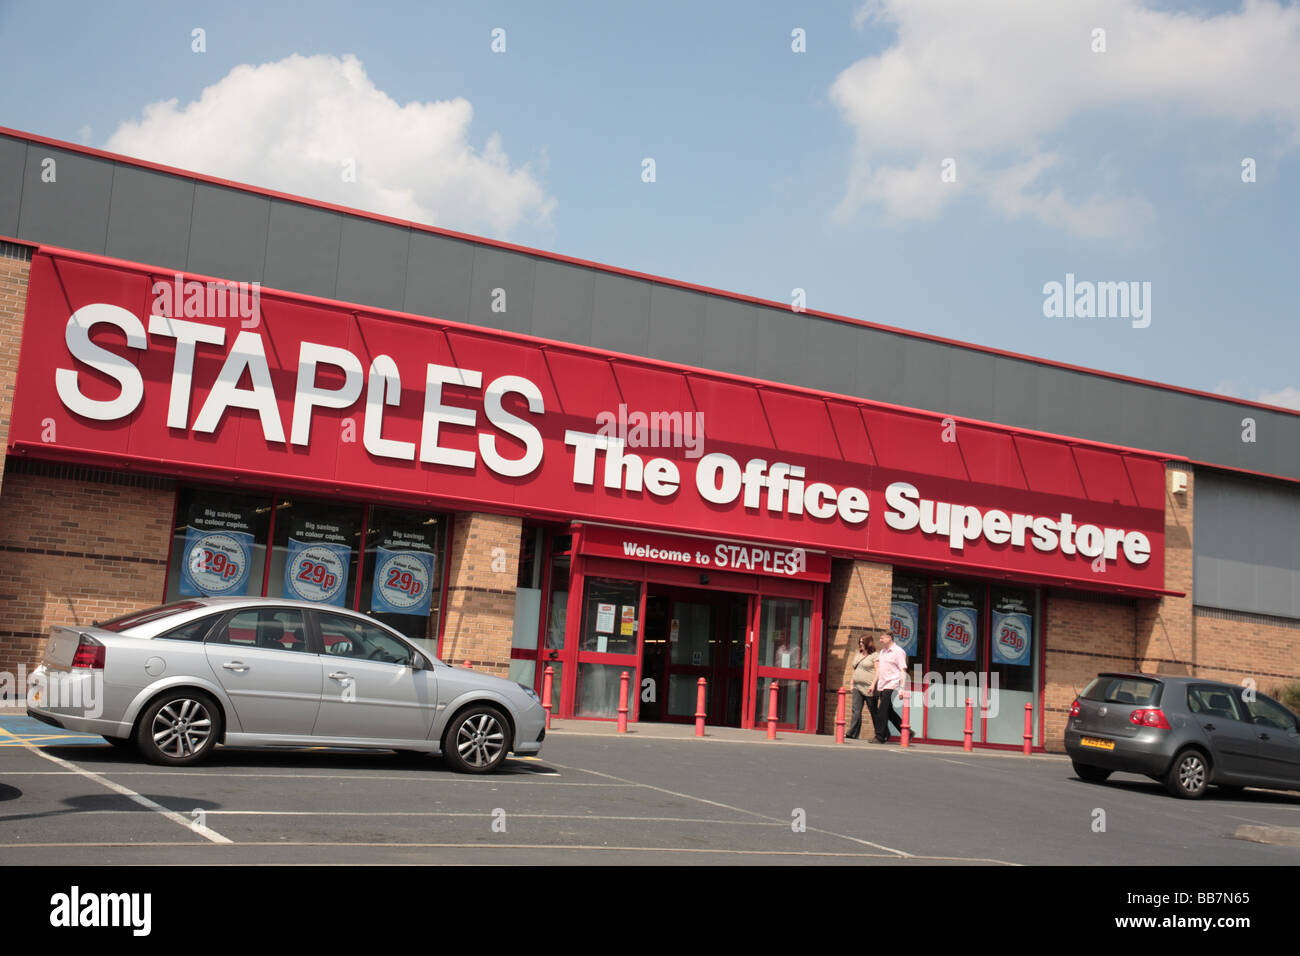 Staples, The Office Superstore, Huddersfield Stock Photo